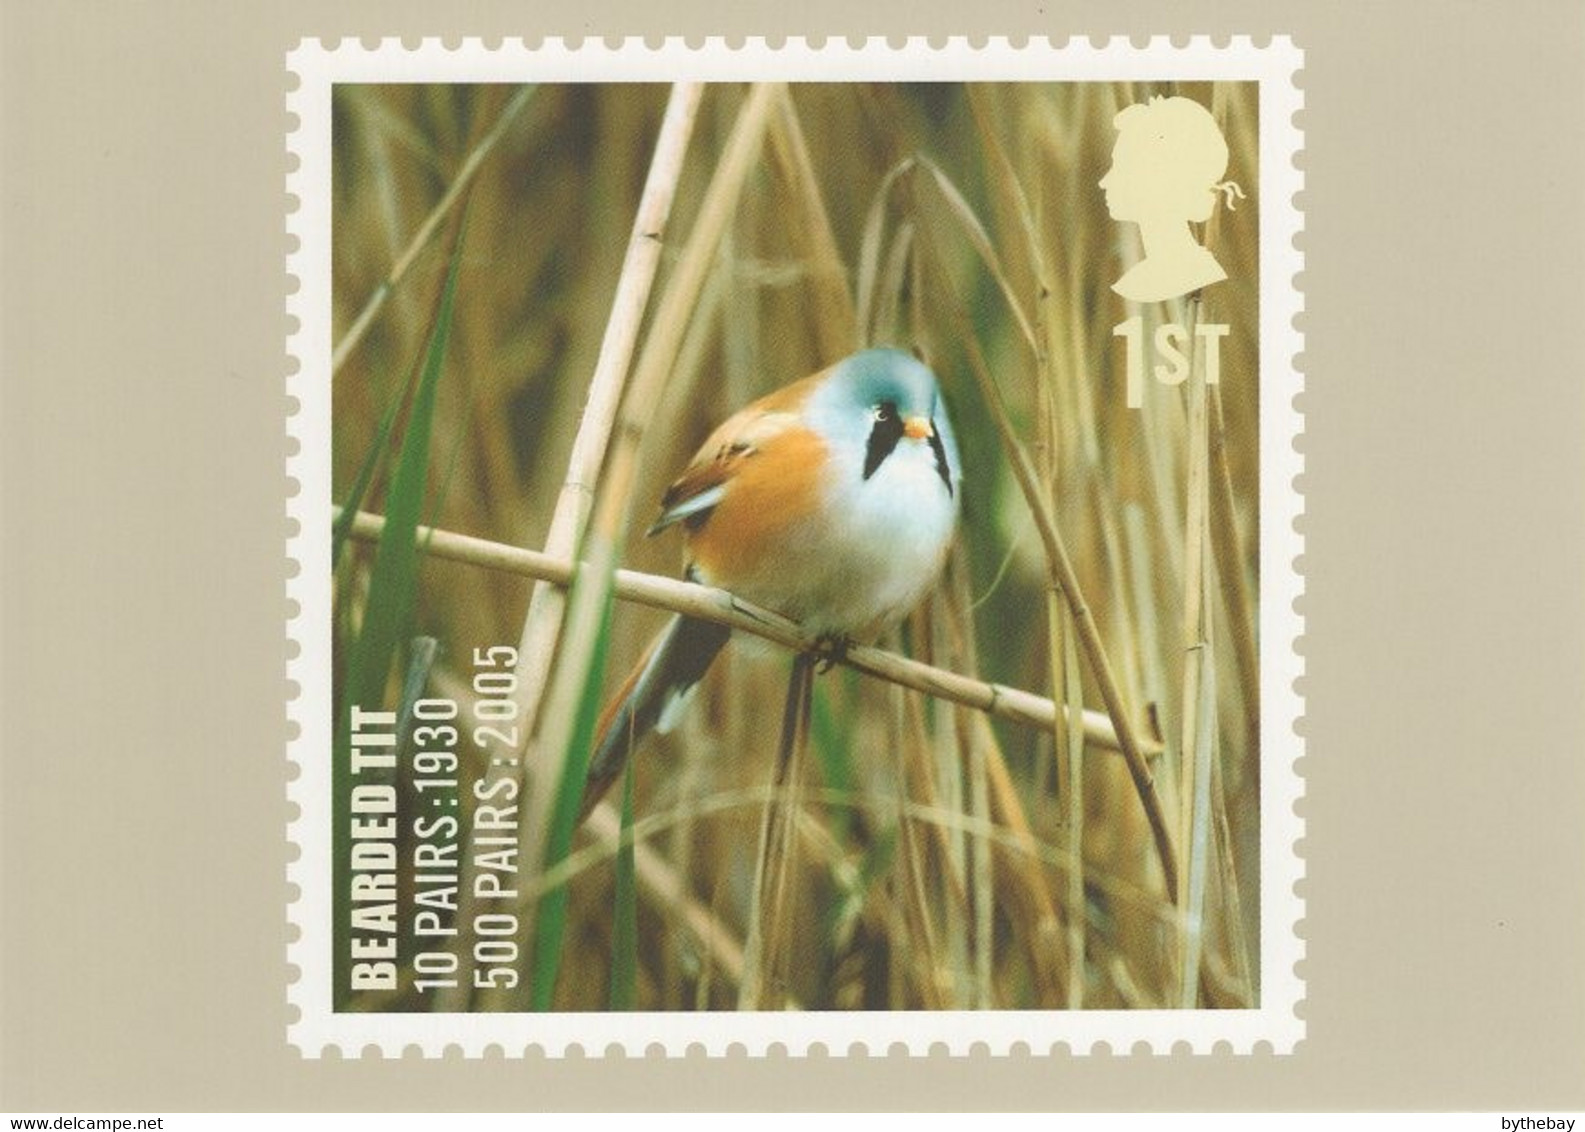 Great Britain 2007 PHQ Card Sc 2499 1st Bearded Tit - Cartes PHQ